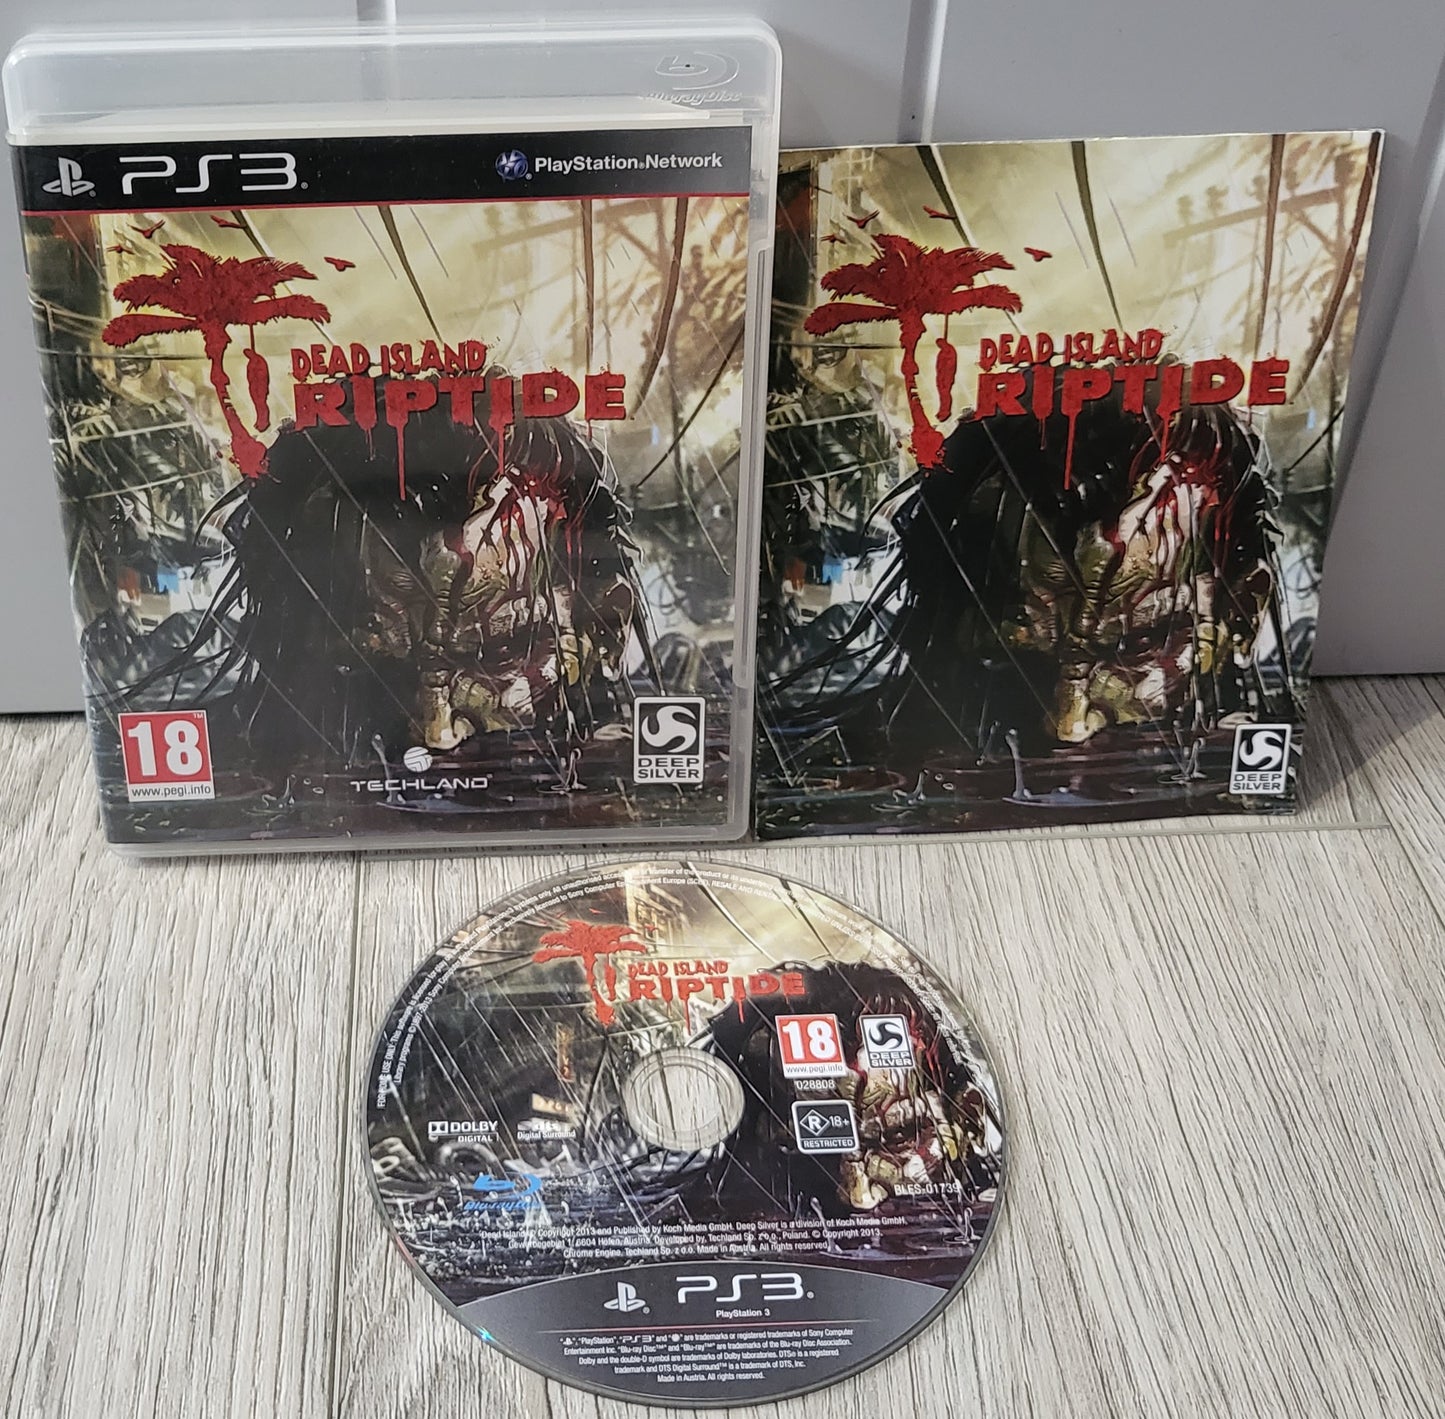 Dead Island: Riptide Sony Playstation 3 (PS3) Game